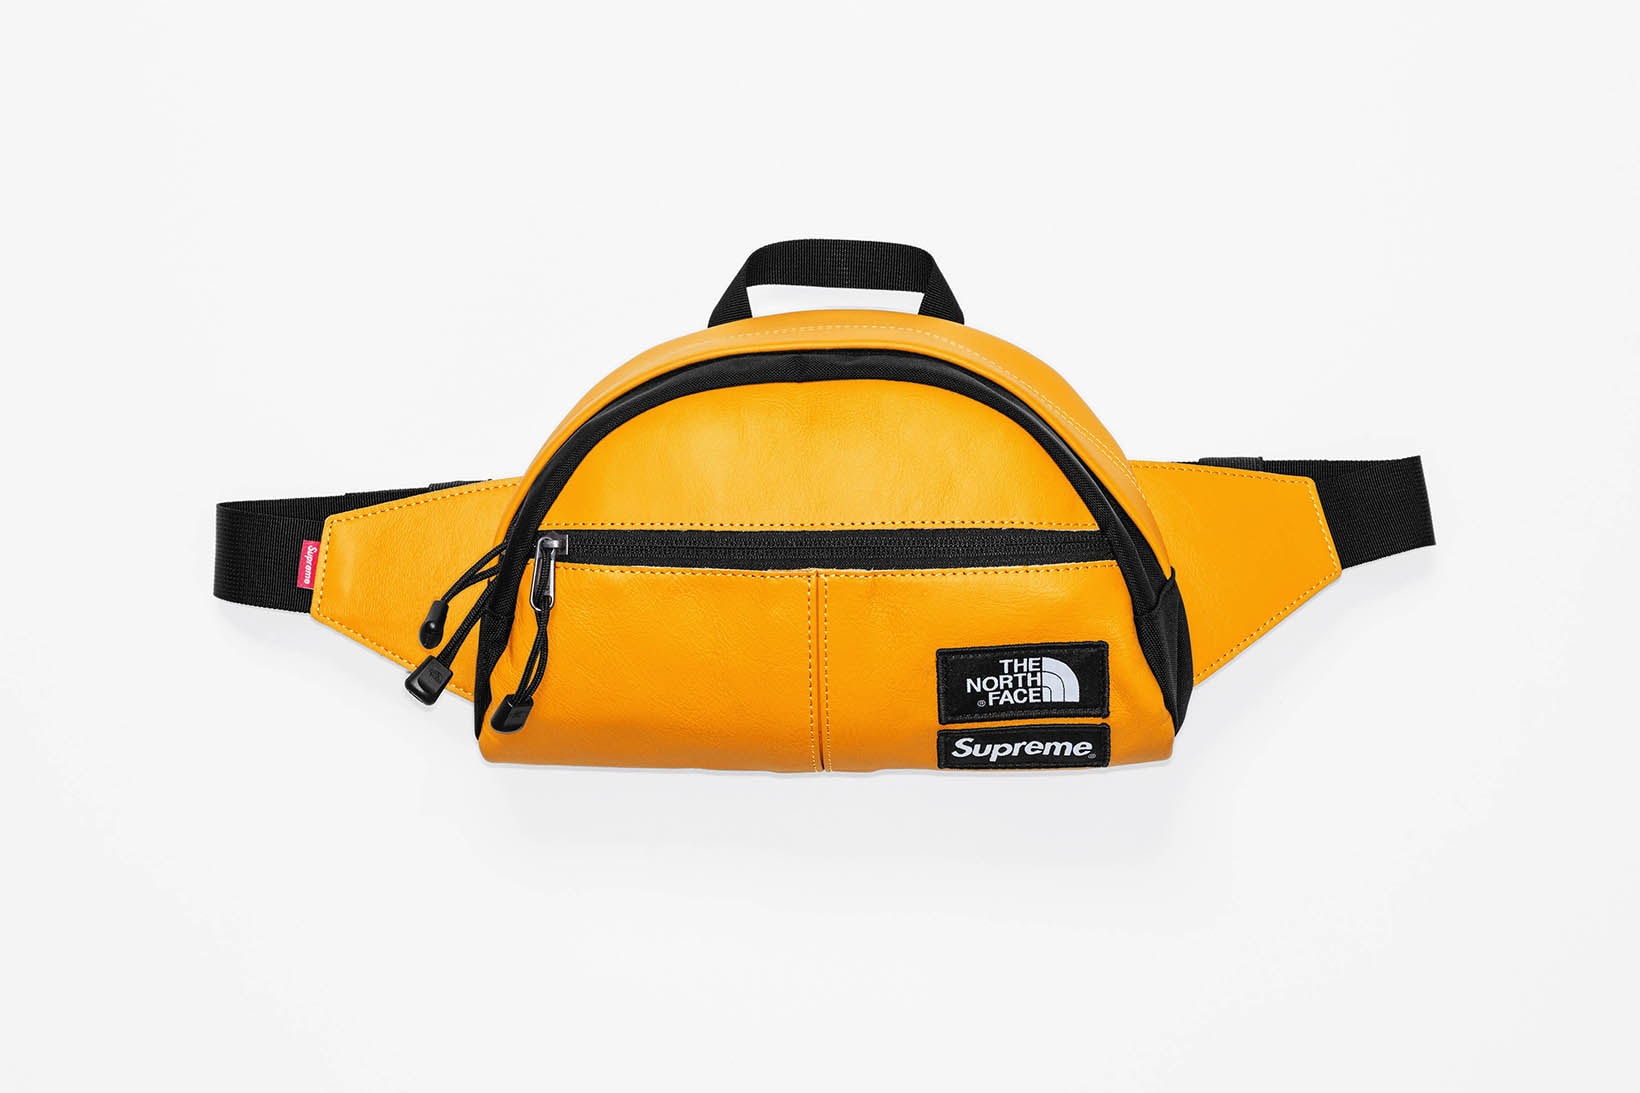 Supreme x The North Face 2017 Fall Yellow Daypack